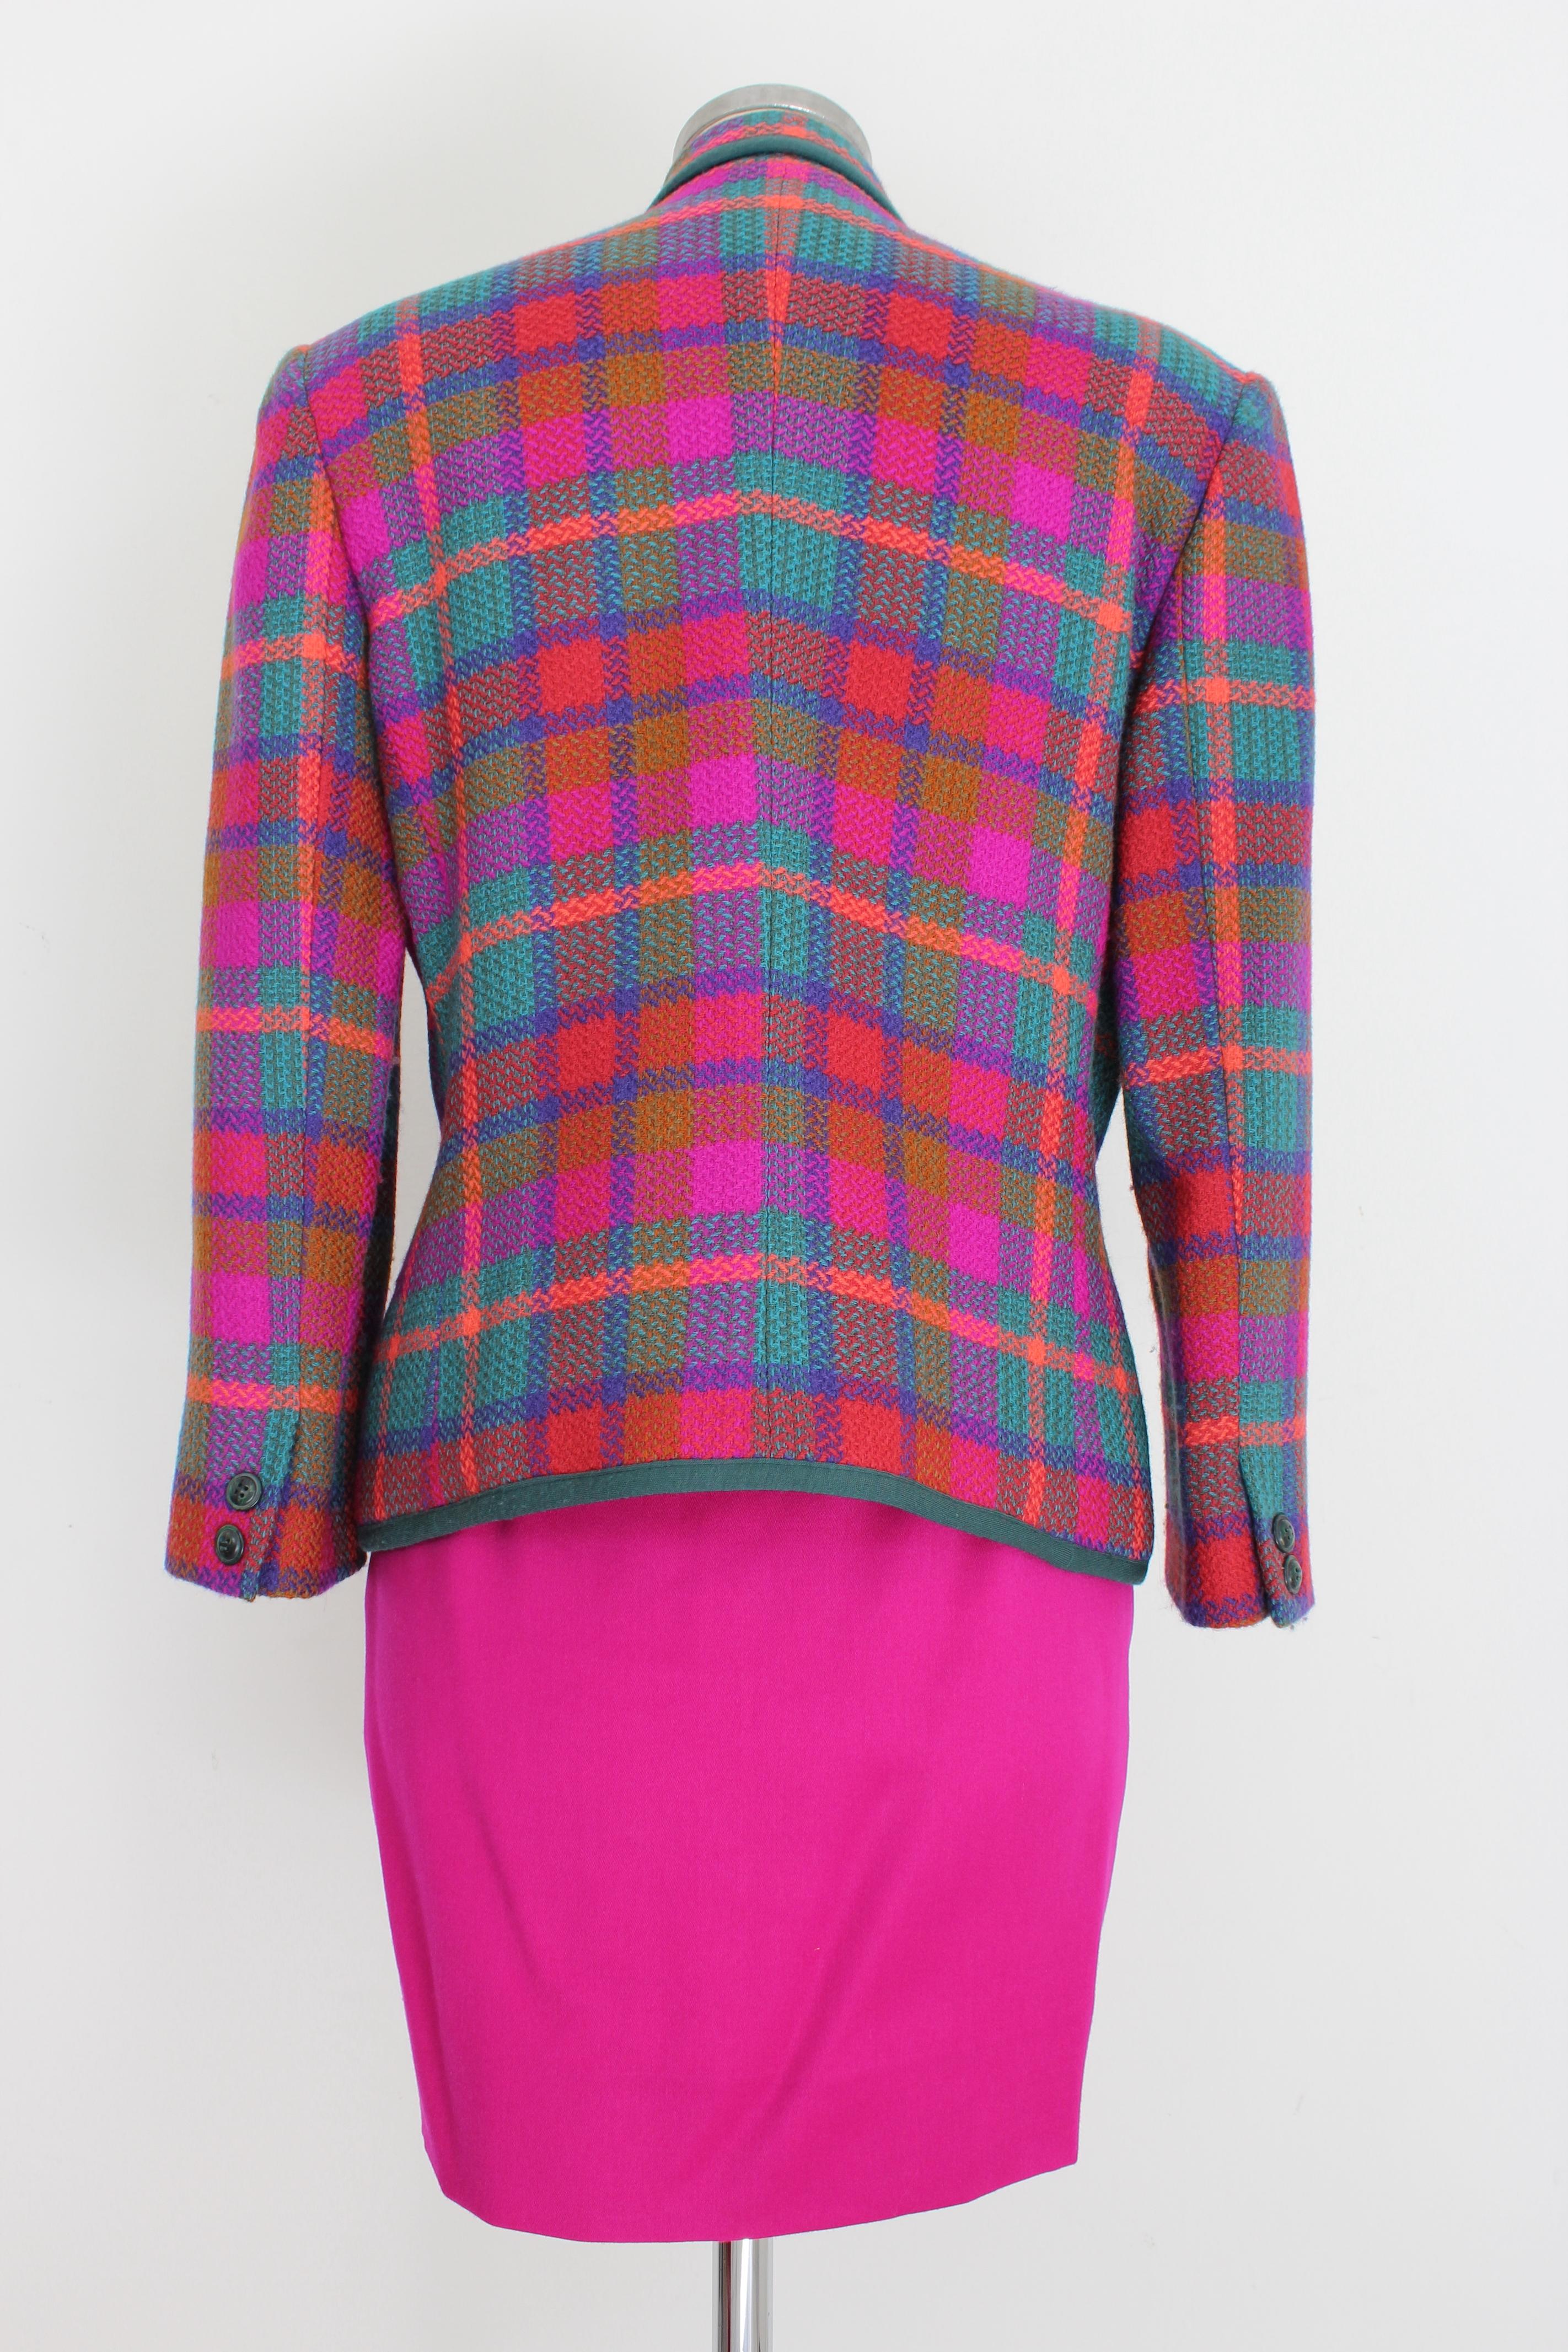 Missoni 80s vintage women's suit skirt. Jacket and skirt, checked pattern. Multicolored, fuchsia, purple and blue jacket, fuchsia straight skirt. 100% wool fabric, lined internally. Made in Italy.

Condition: Excellent

Article used few times, it